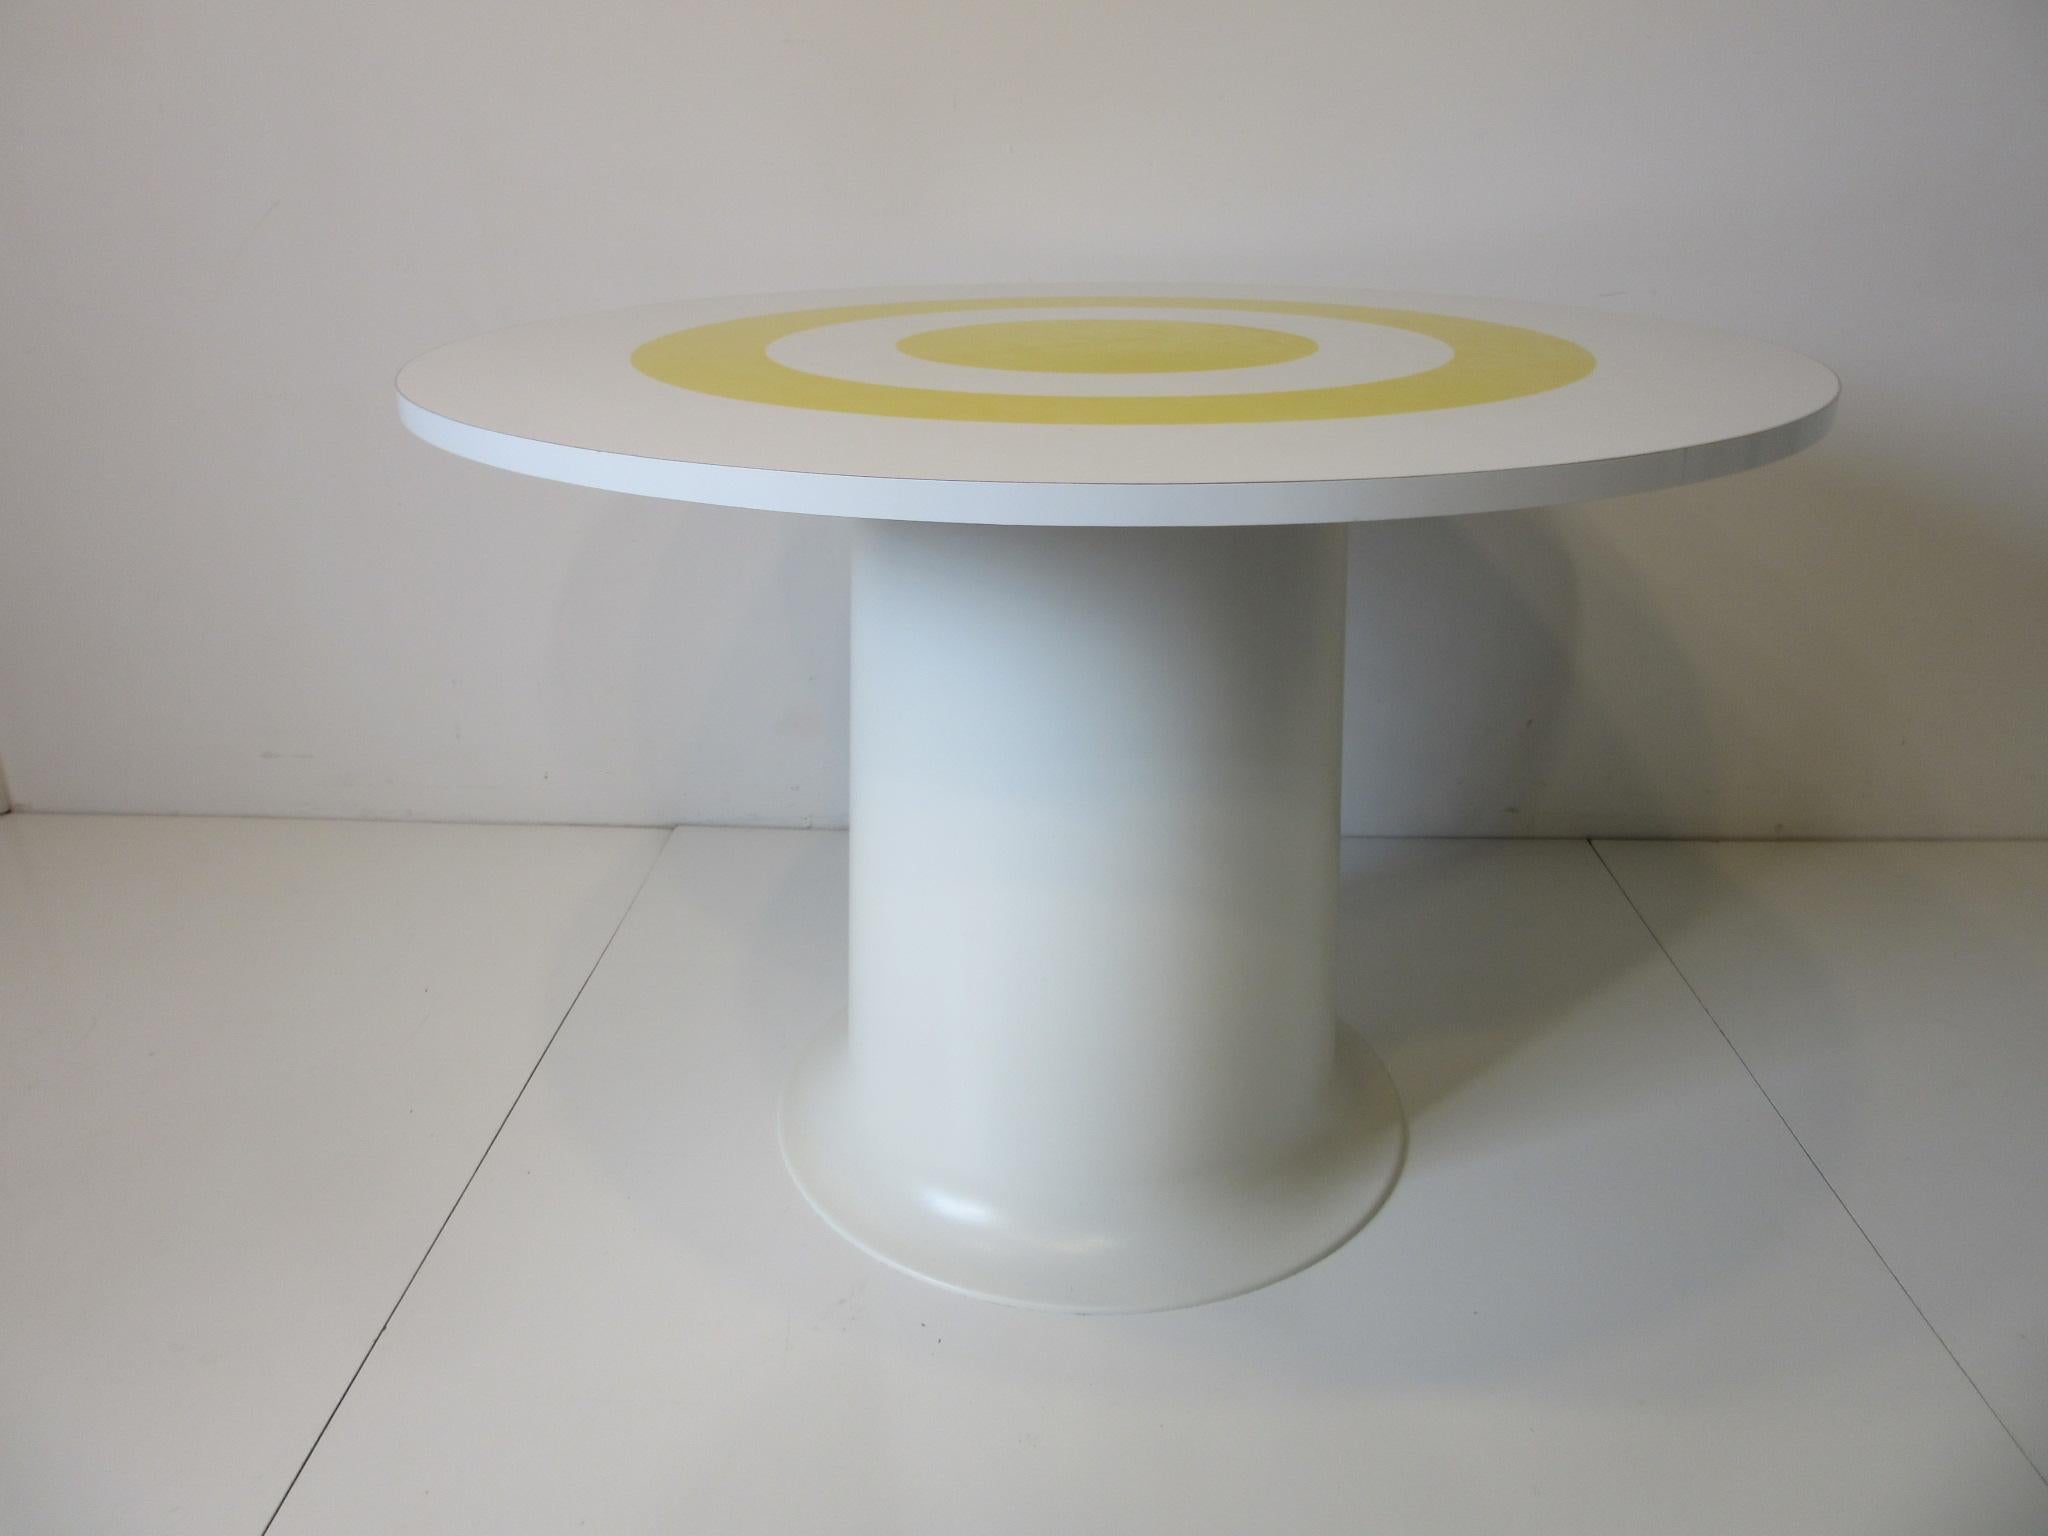 A Space Age dining table with a round laminate top and a bright yellow bulls eye design to the surface sitting on a molded fiberglass and ABS plastic pedestal base in white. Brighten up that small dining area, party room or play room with this fun